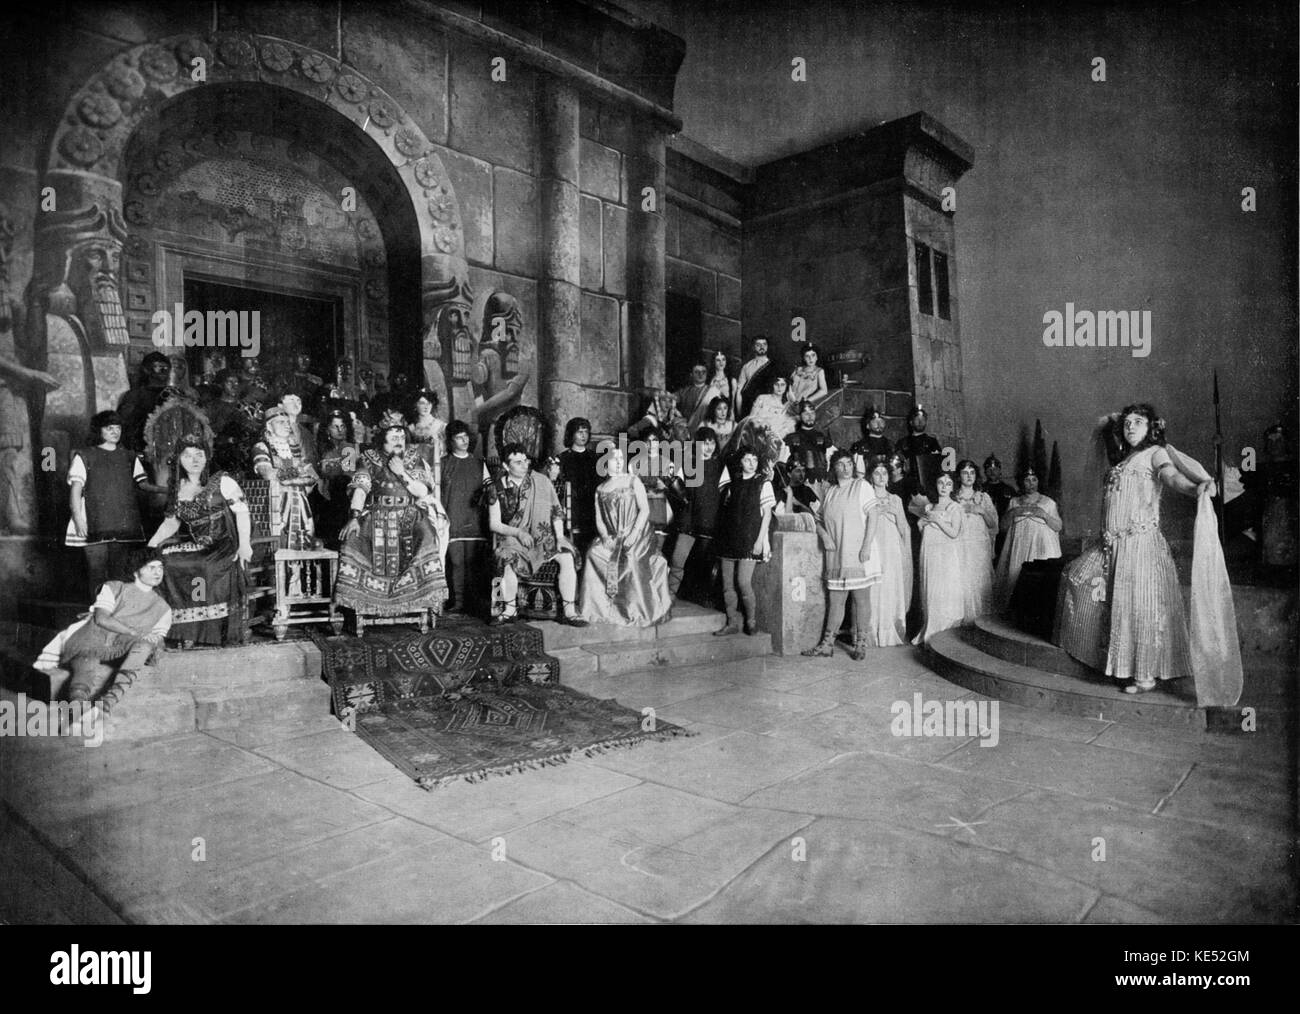 STRAUSS  Richard 's opera  SALOME .   Final scene with Salome 's dance of the seven veils.  Marie  Wittich as Salome and  Burrian as Herod.  Original premiere production at Dresden 9 December 1905. German composer & conductor. 1864-1949 Stock Photo